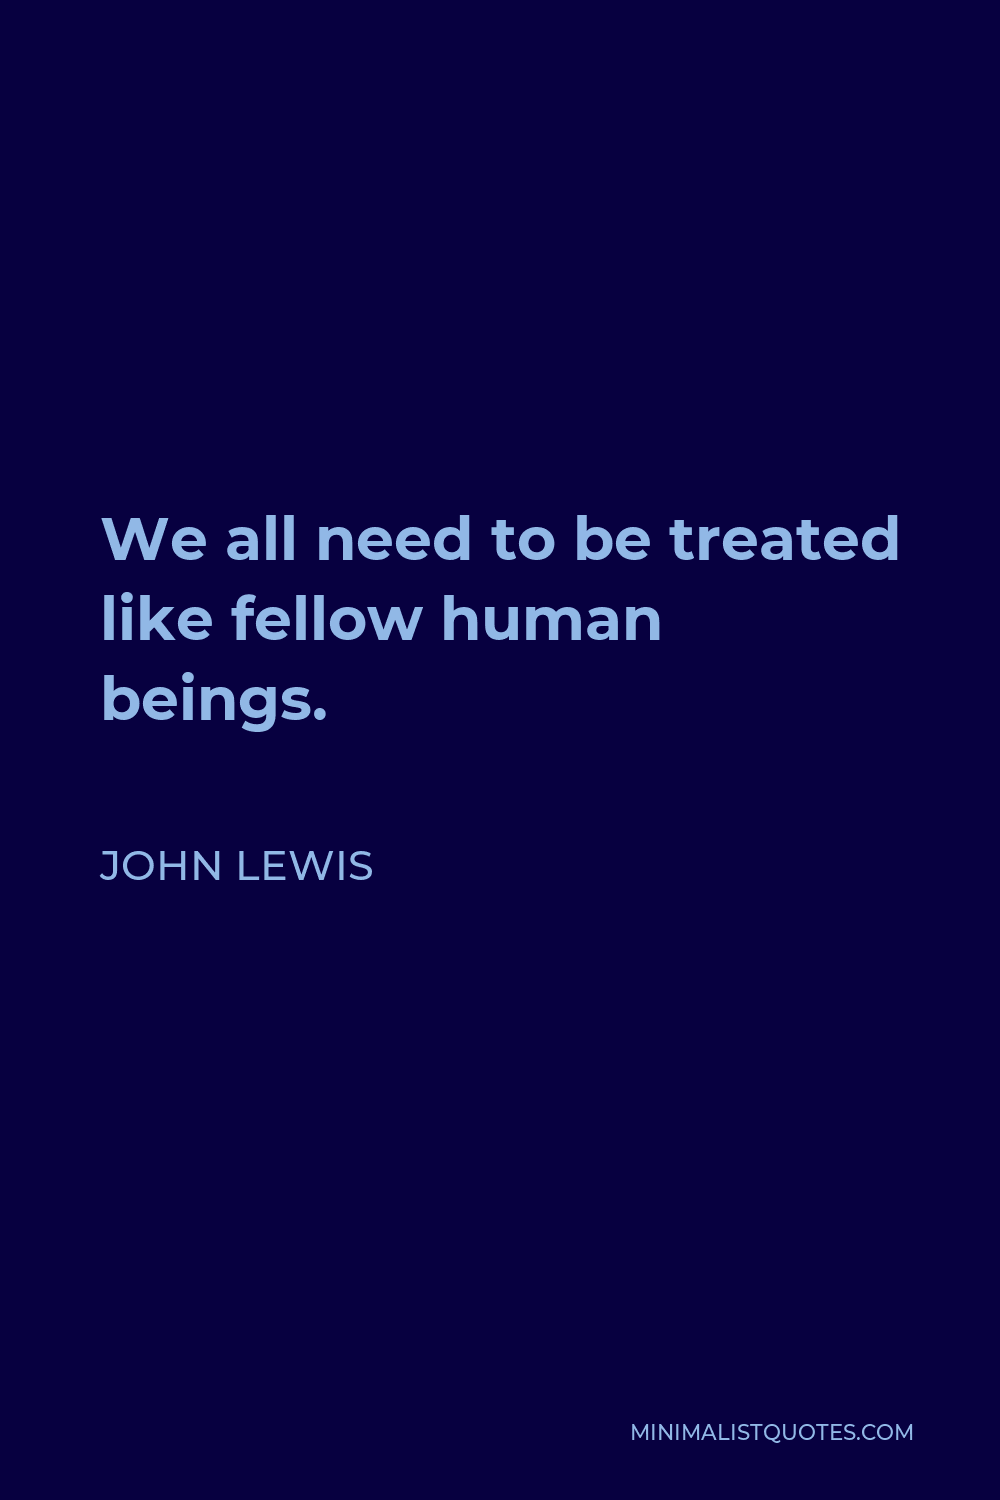 John Lewis Quote - We all need to be treated like fellow human beings.